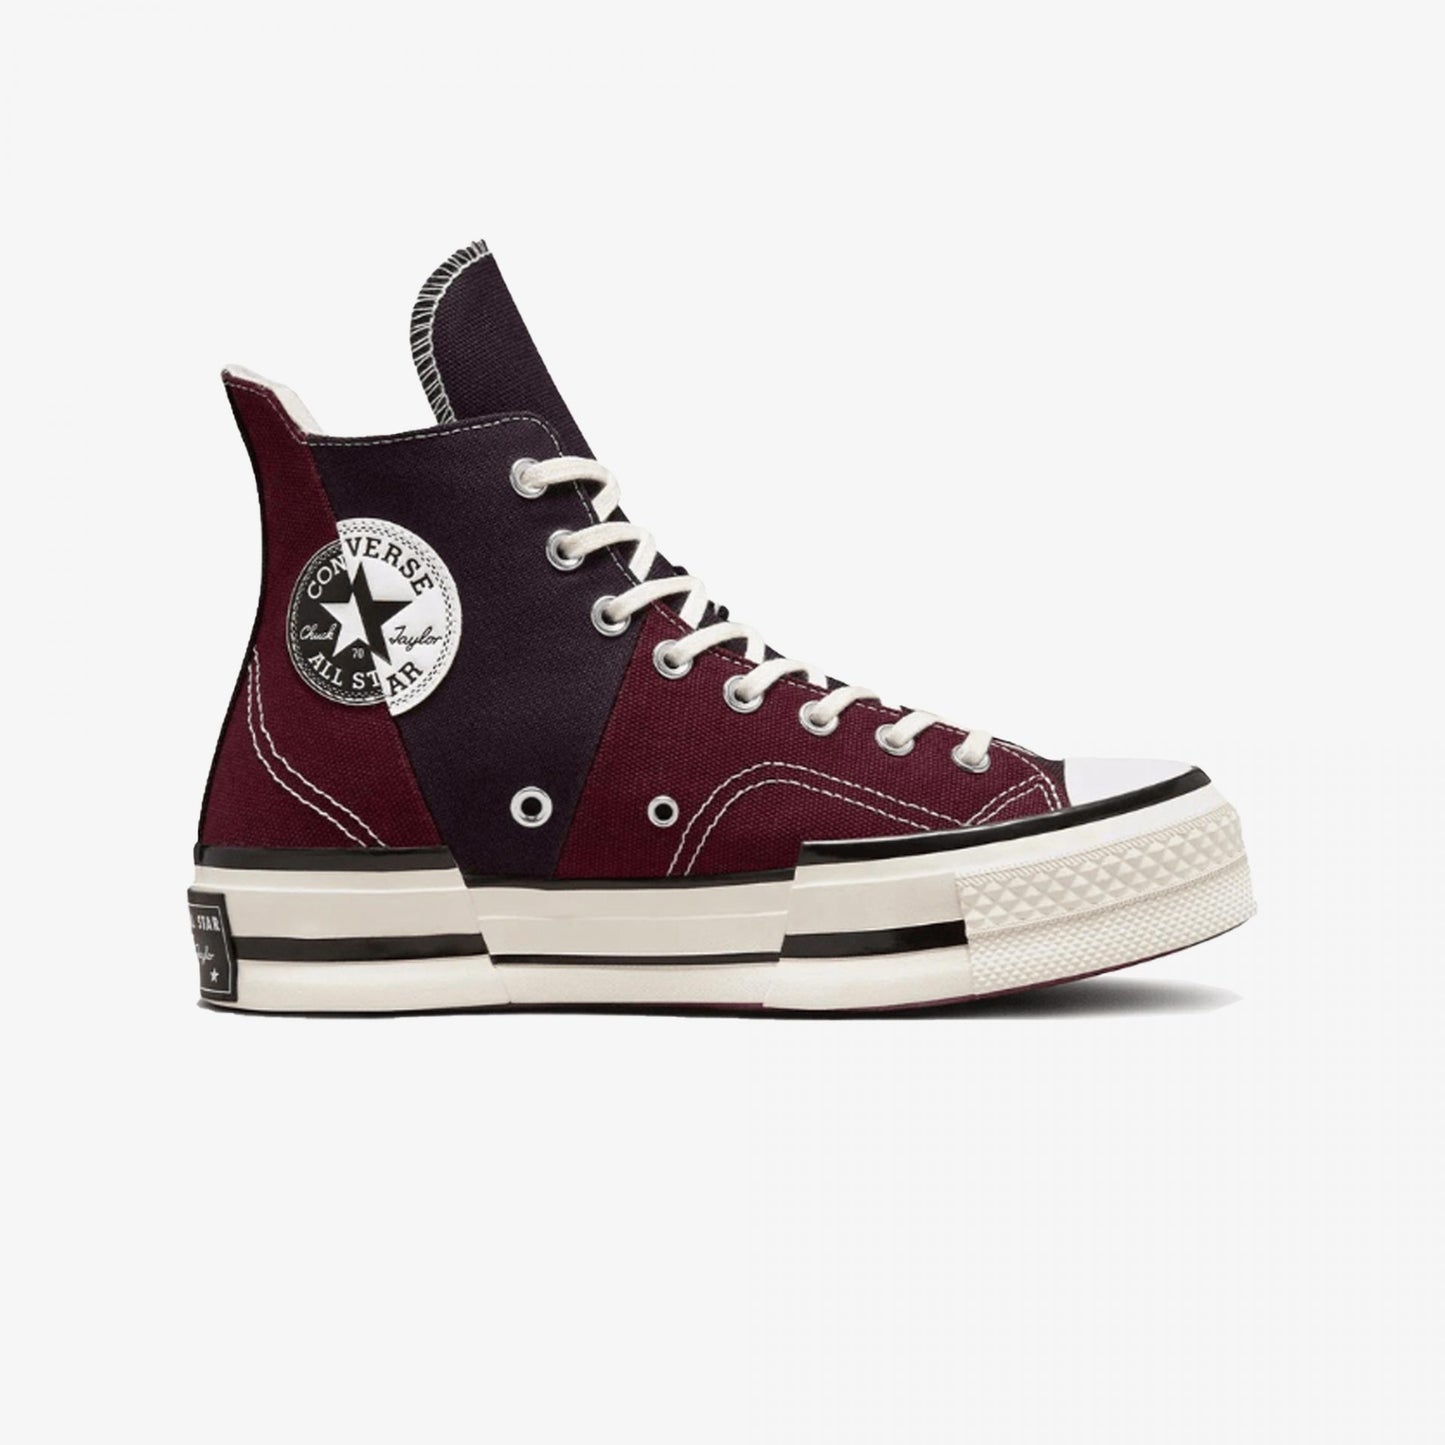 CHUCK 70 PLUS COUNTER CLIMATE HIGH TOP 'DARK BEETROOT/EGRET/BLACK'